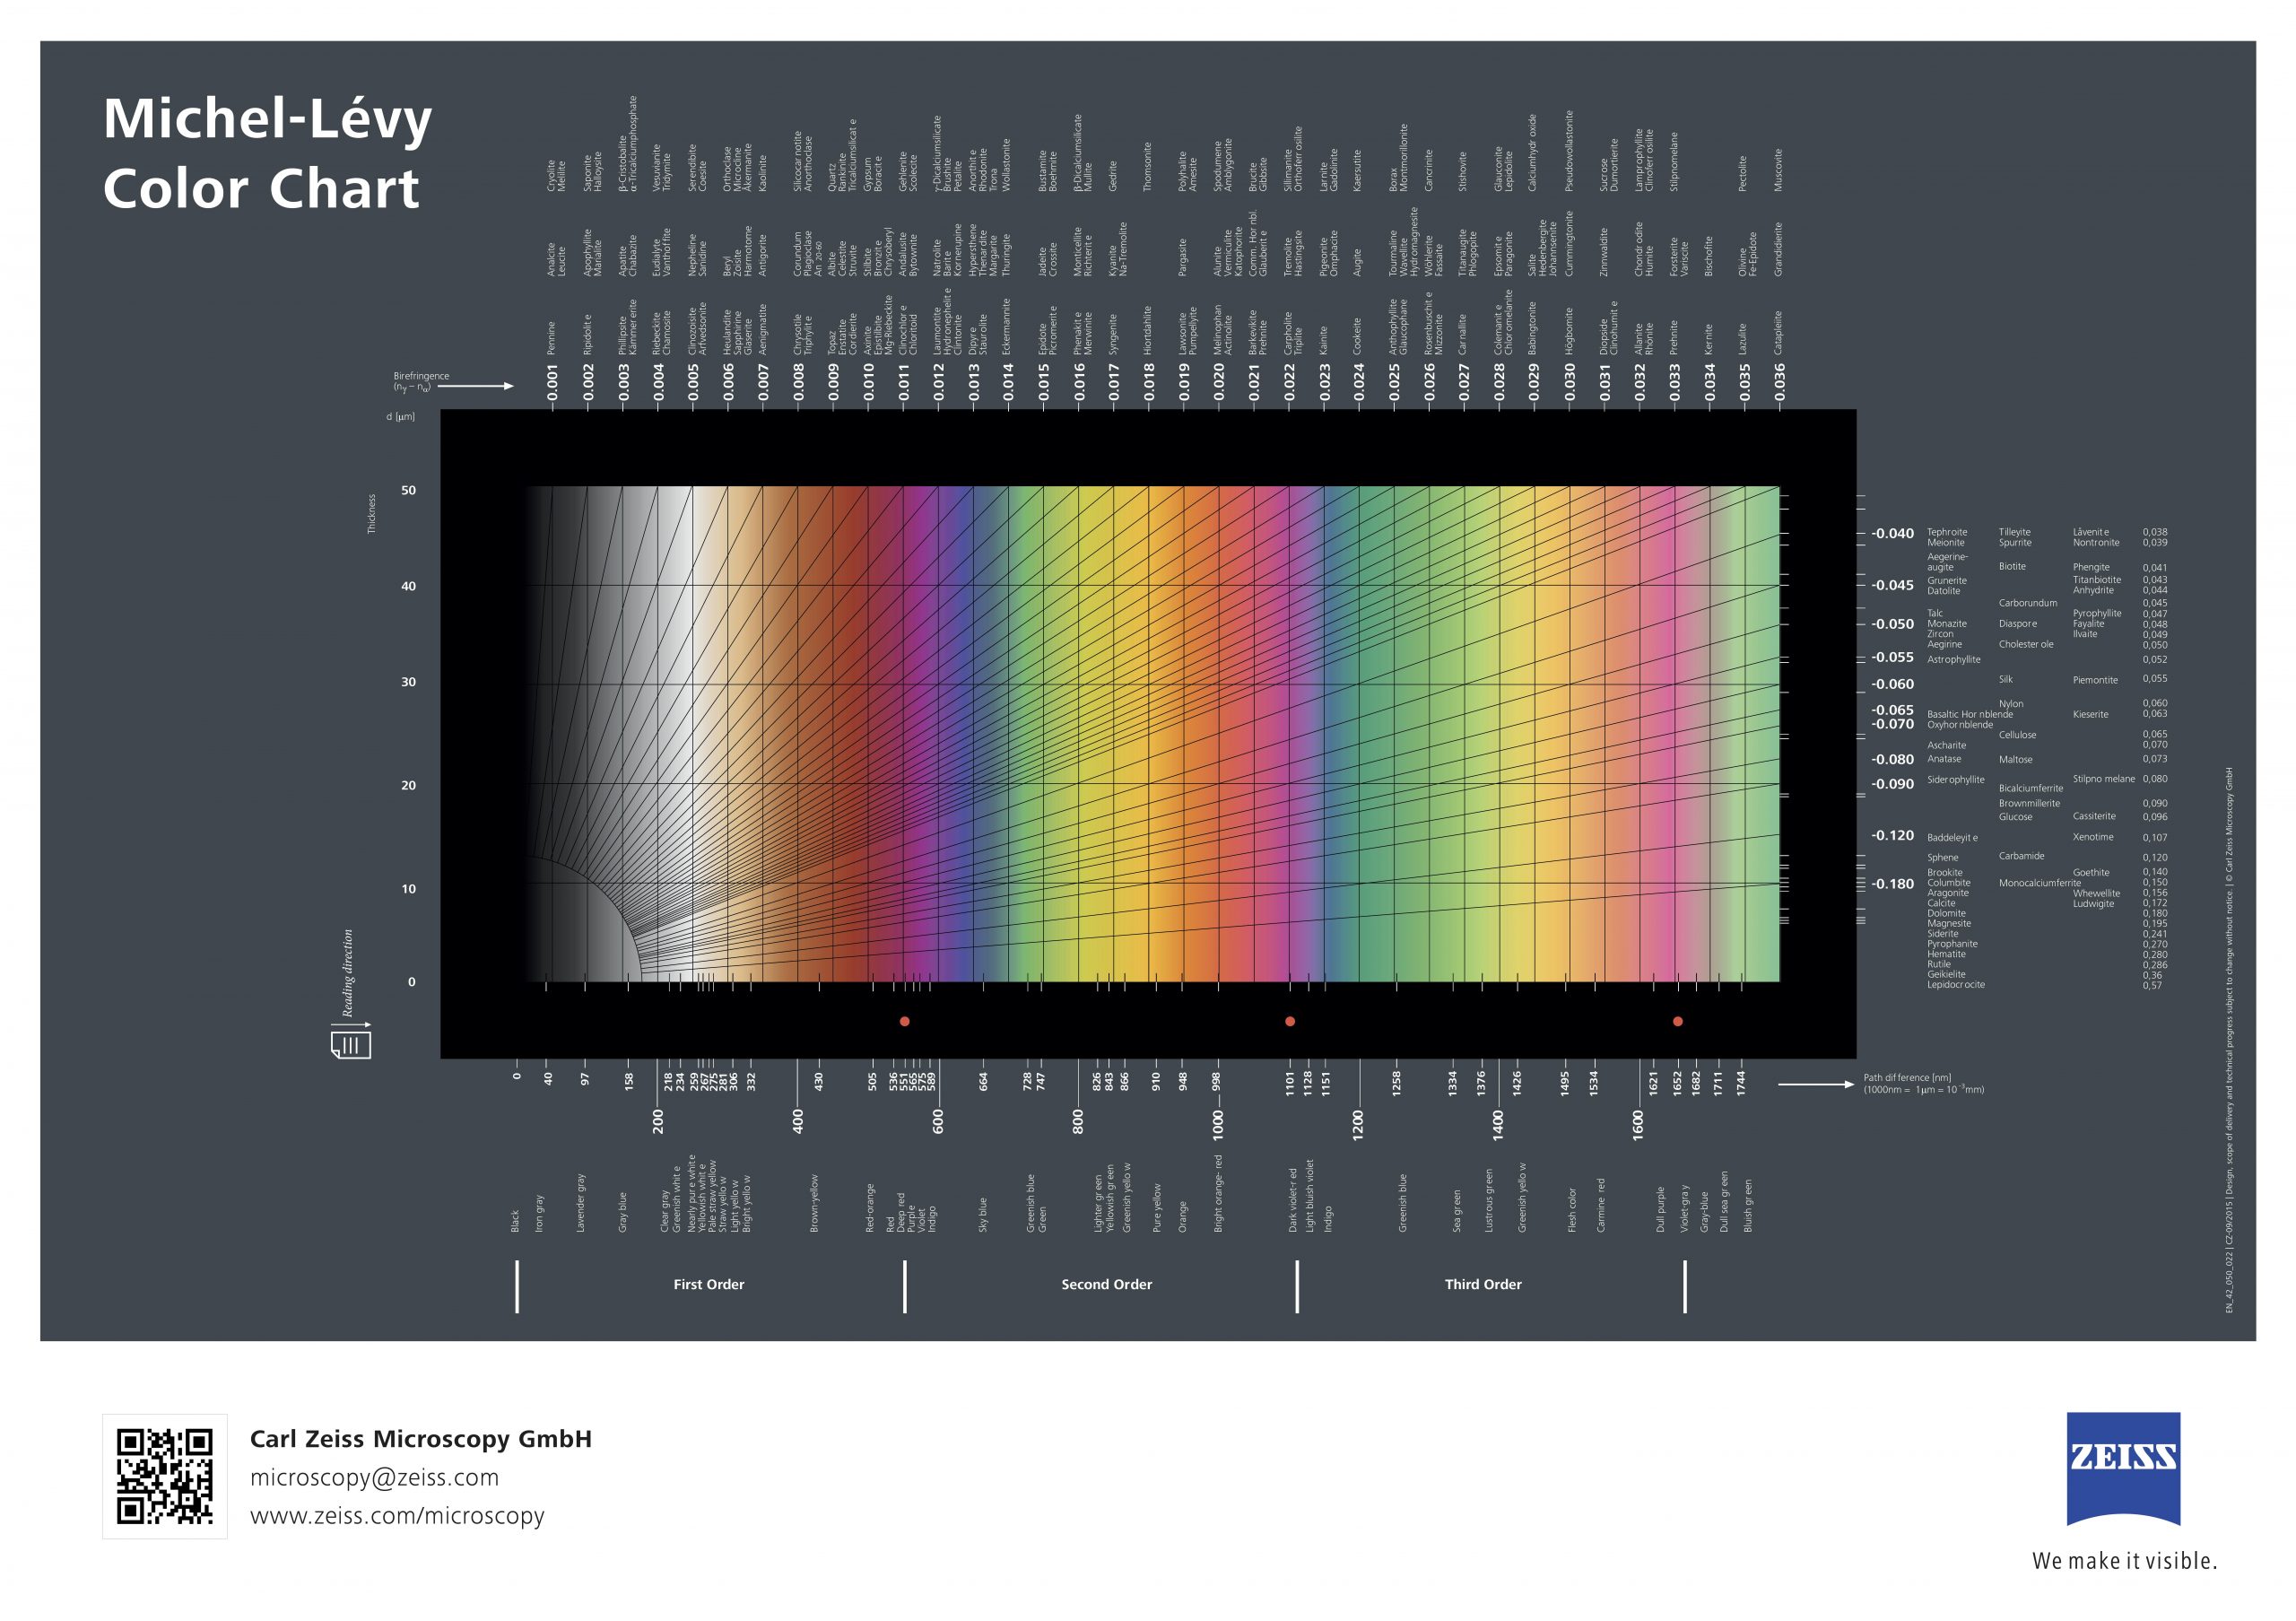 Figure 2.7.3. The Michel-Levy Interference Color Chart.